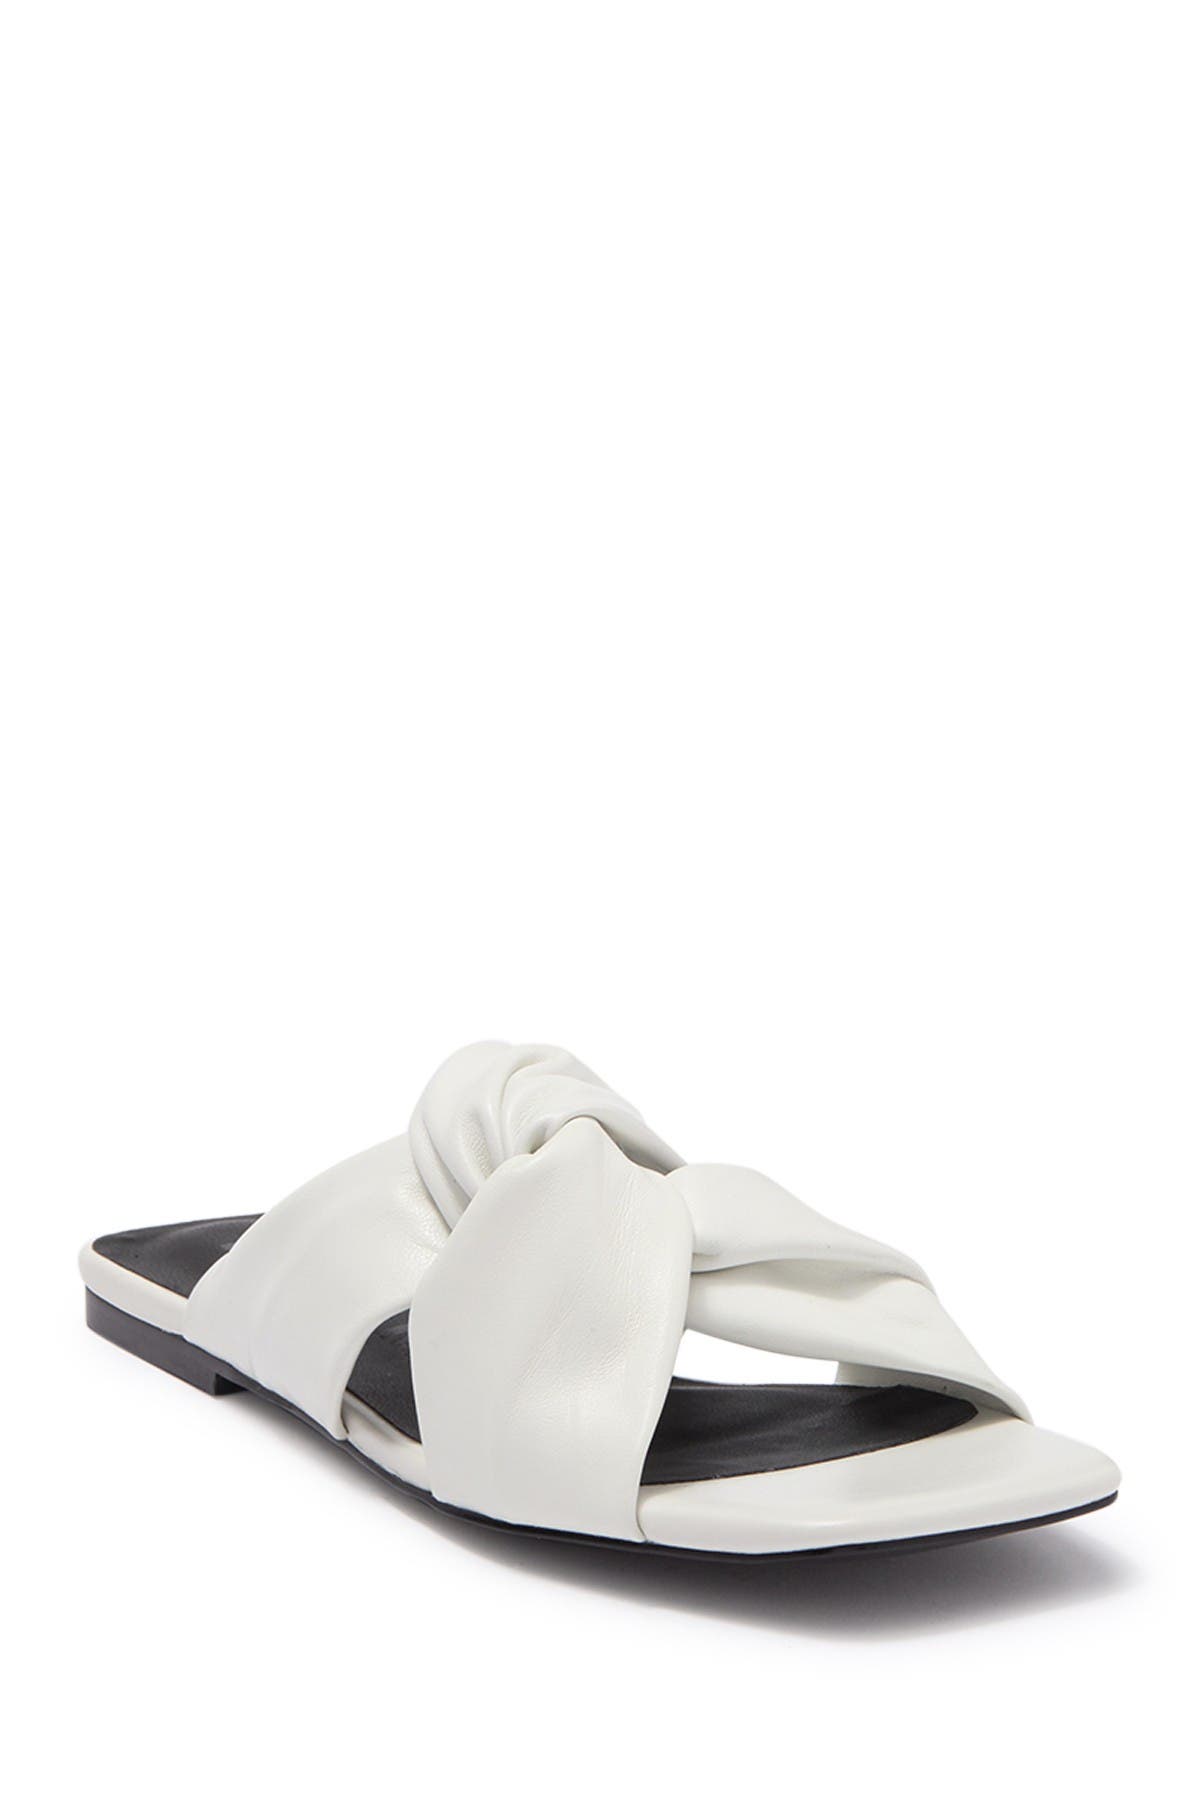 Alias Mae Pria Knot Sandal In Ivory Leather